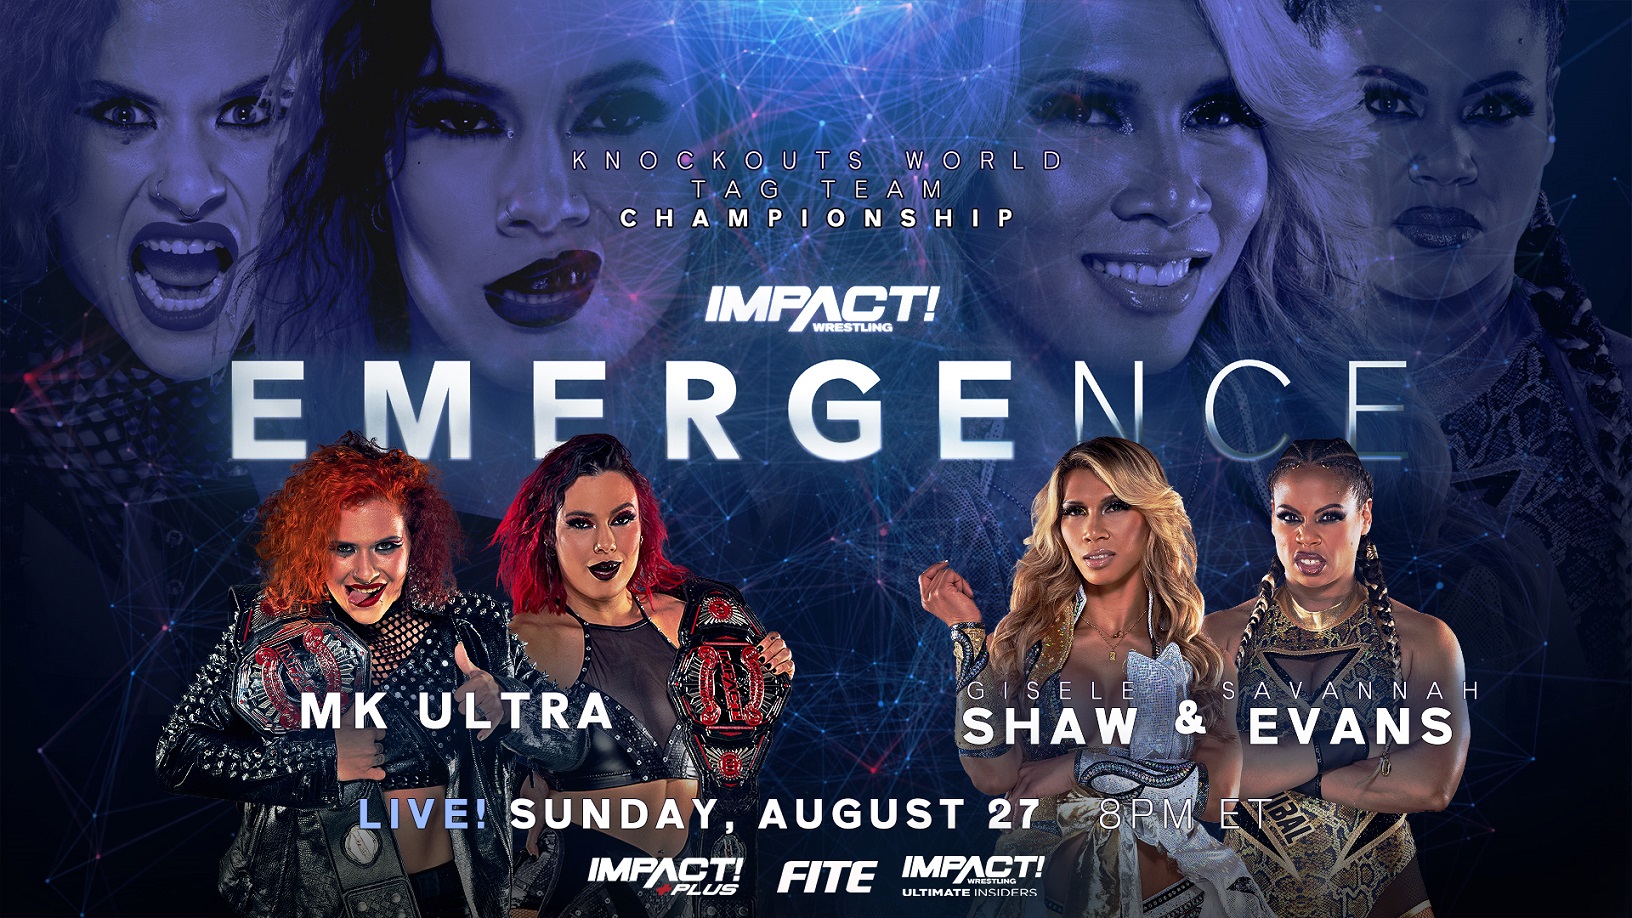 Emergence: Gisele Shaw & Savannah Evans Set for Knockouts World Tag Team Title Clash With MK Ultra